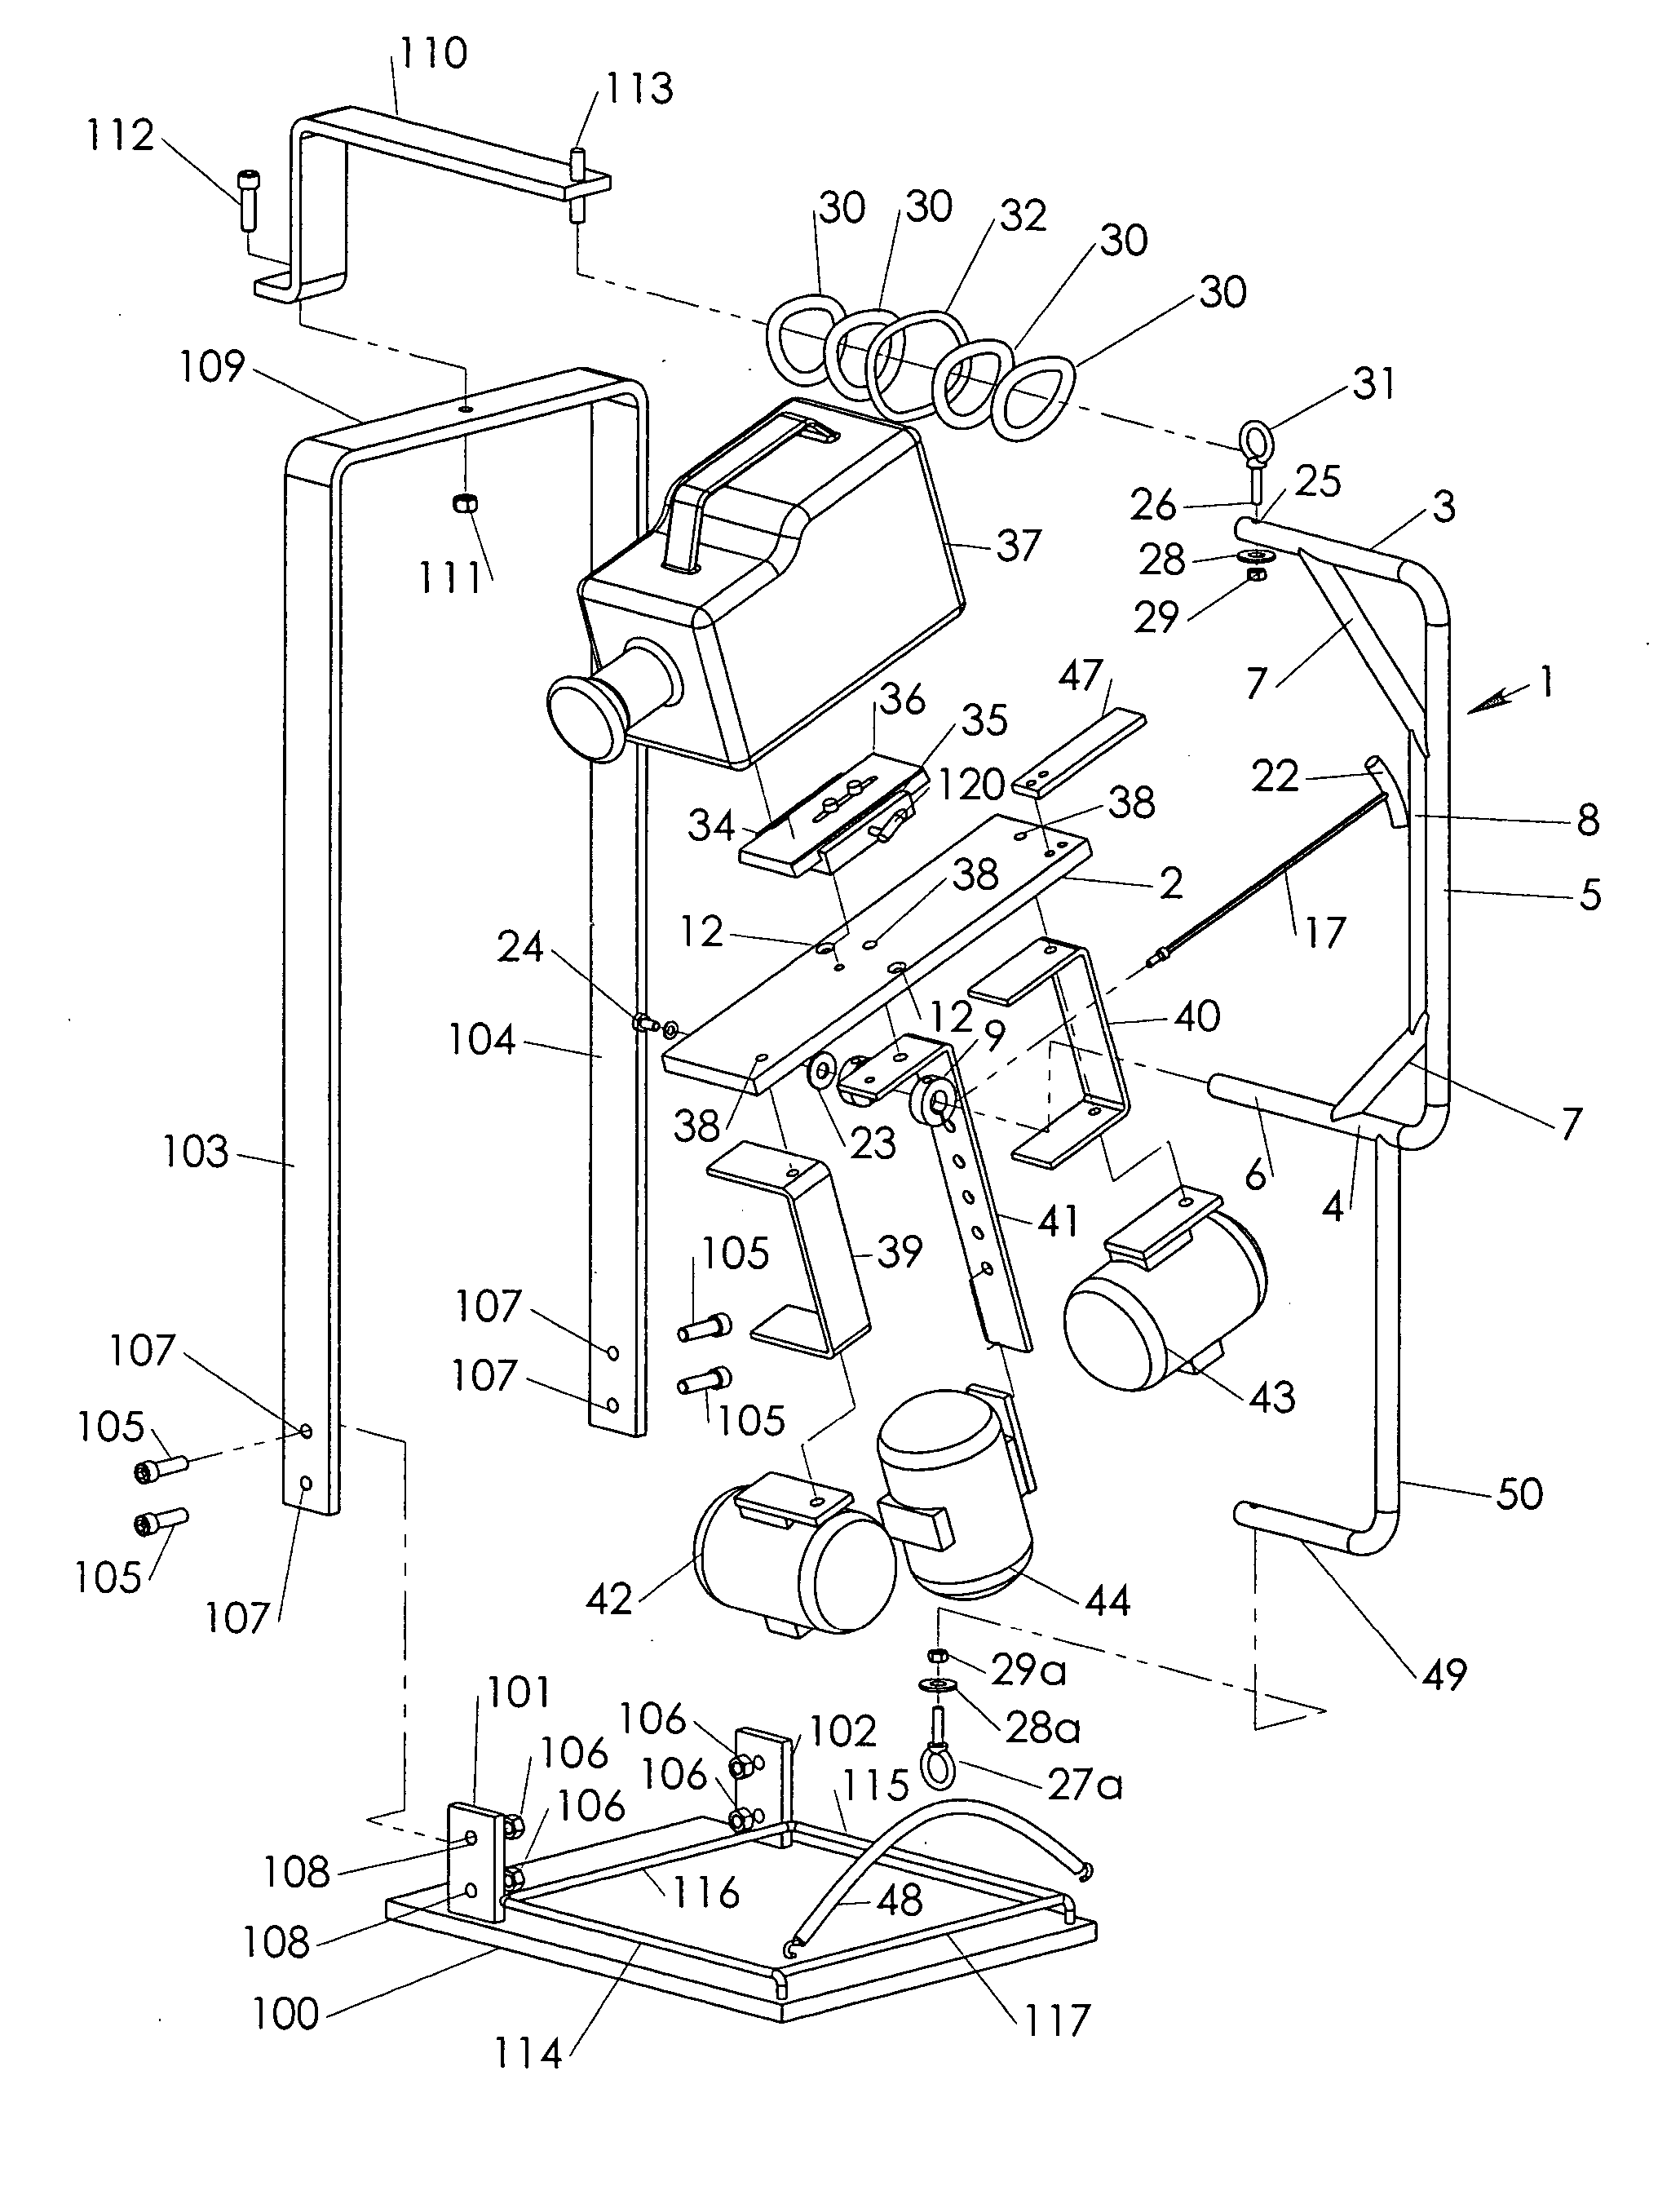 Frame assembly for supporting a camera